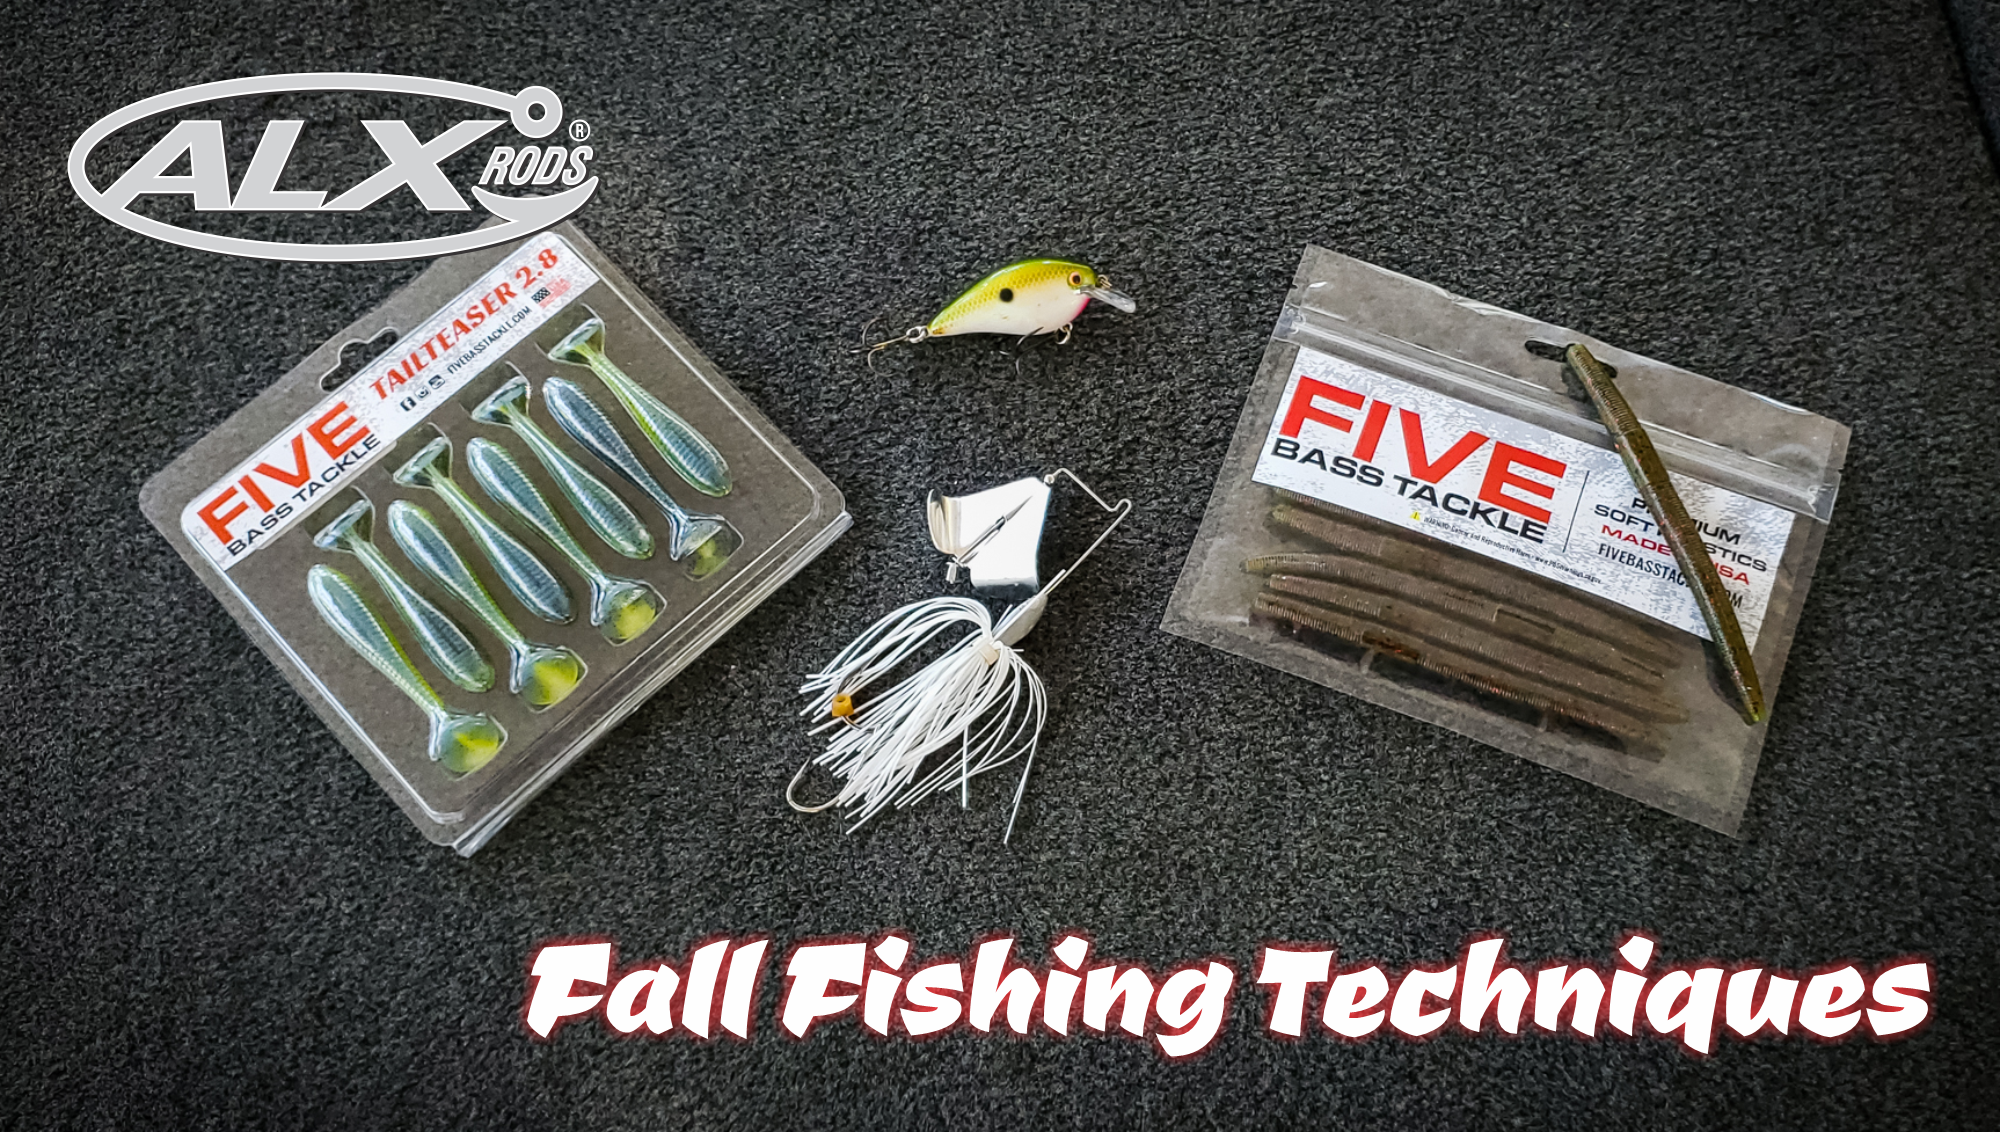 Fall Fishing Techniques - ALX Rods